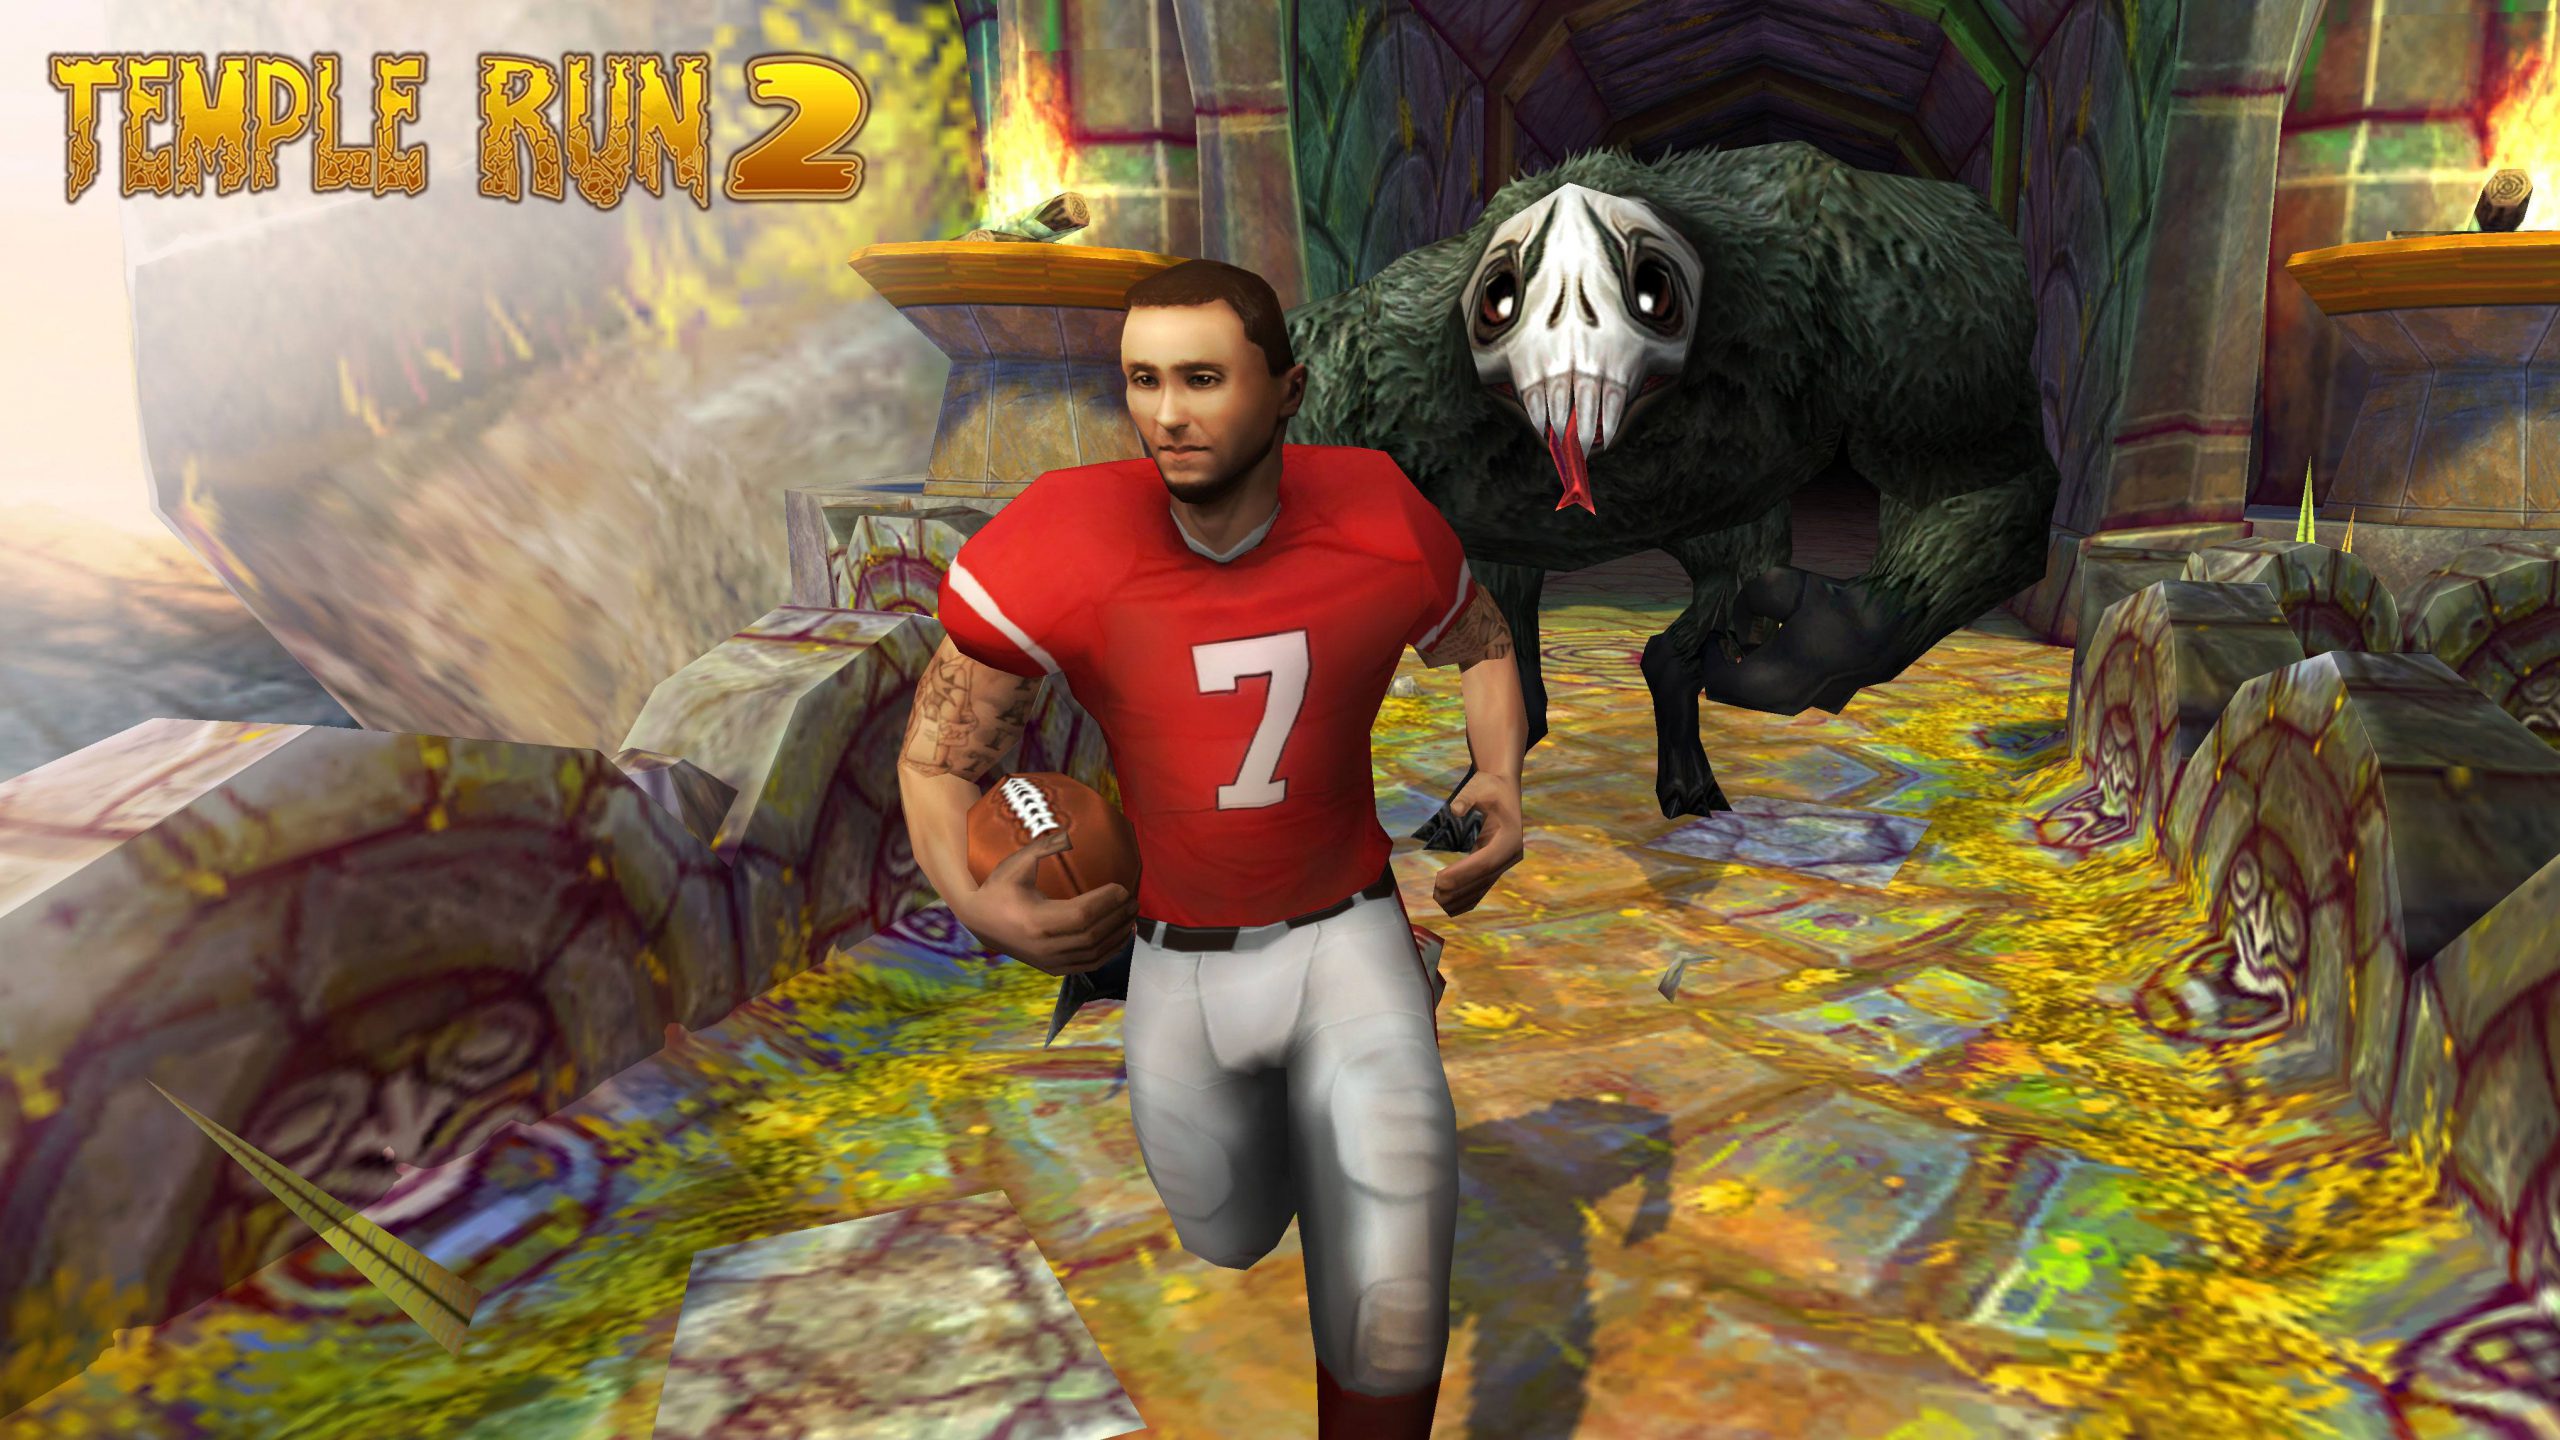 NFL Players are Sacking Demons in Temple Run 2